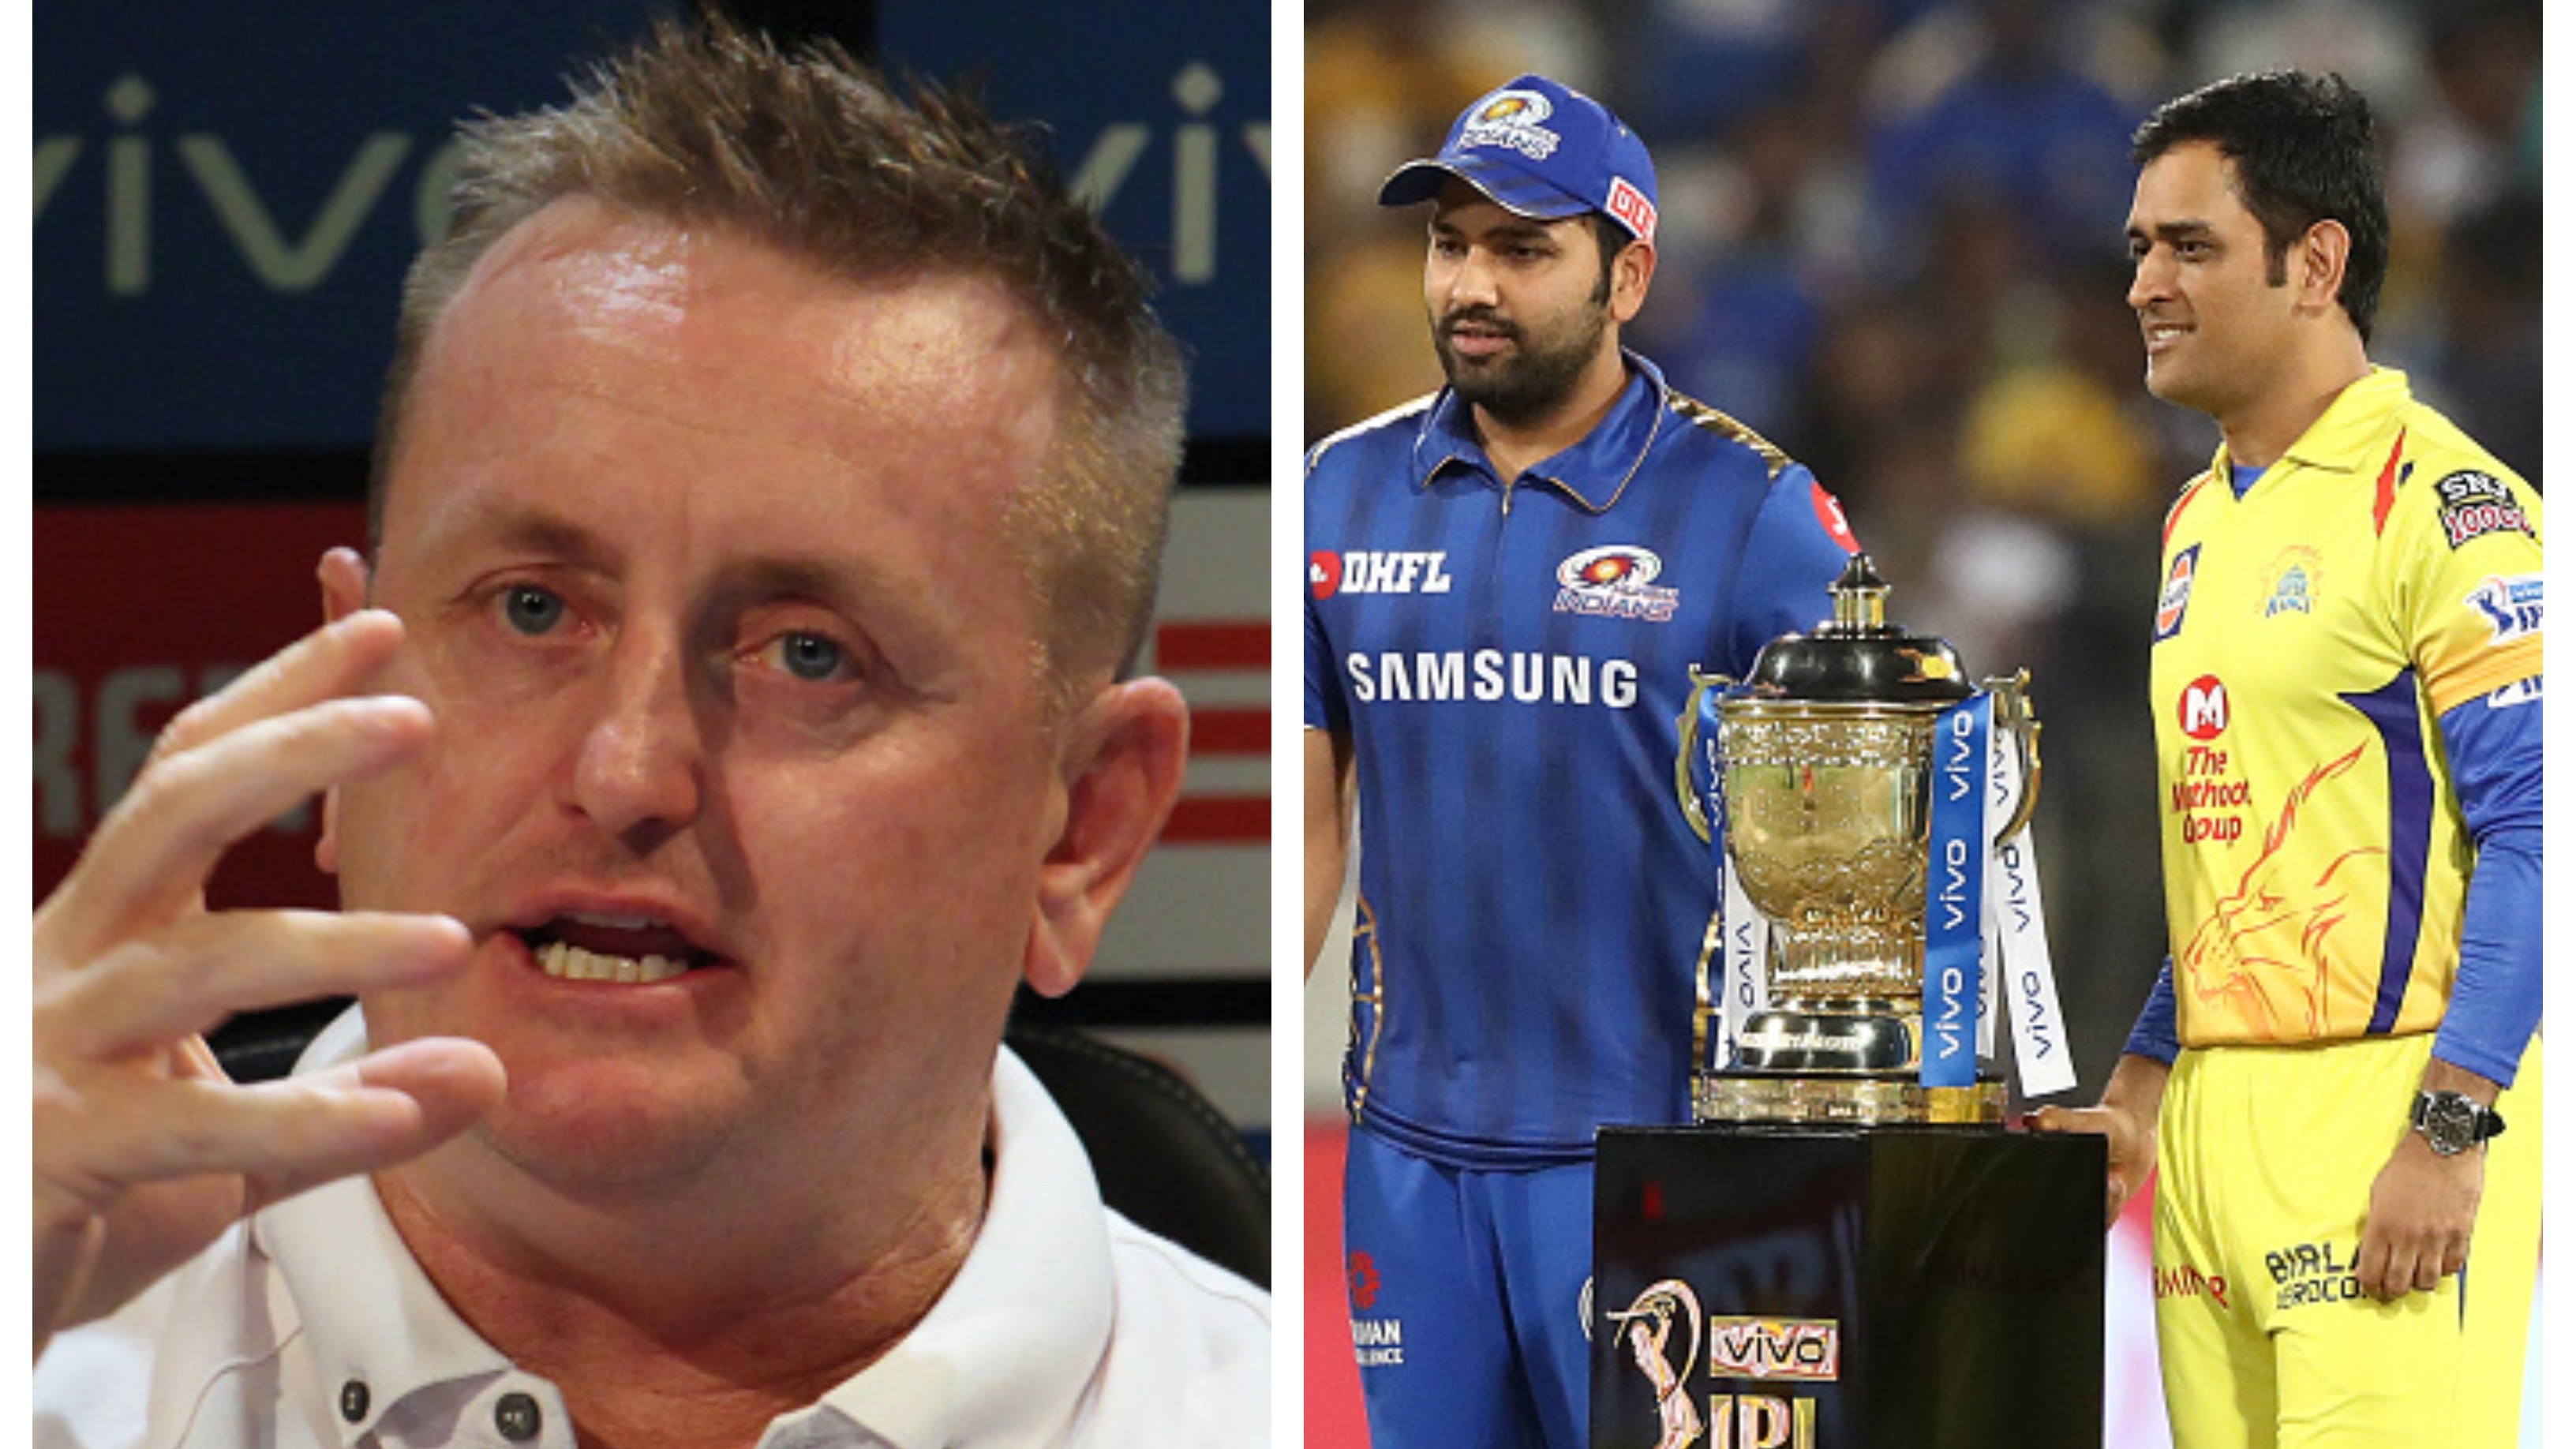 IPL 2020: Indian players may find no crowd presence disconcerting, says Scott Styris 